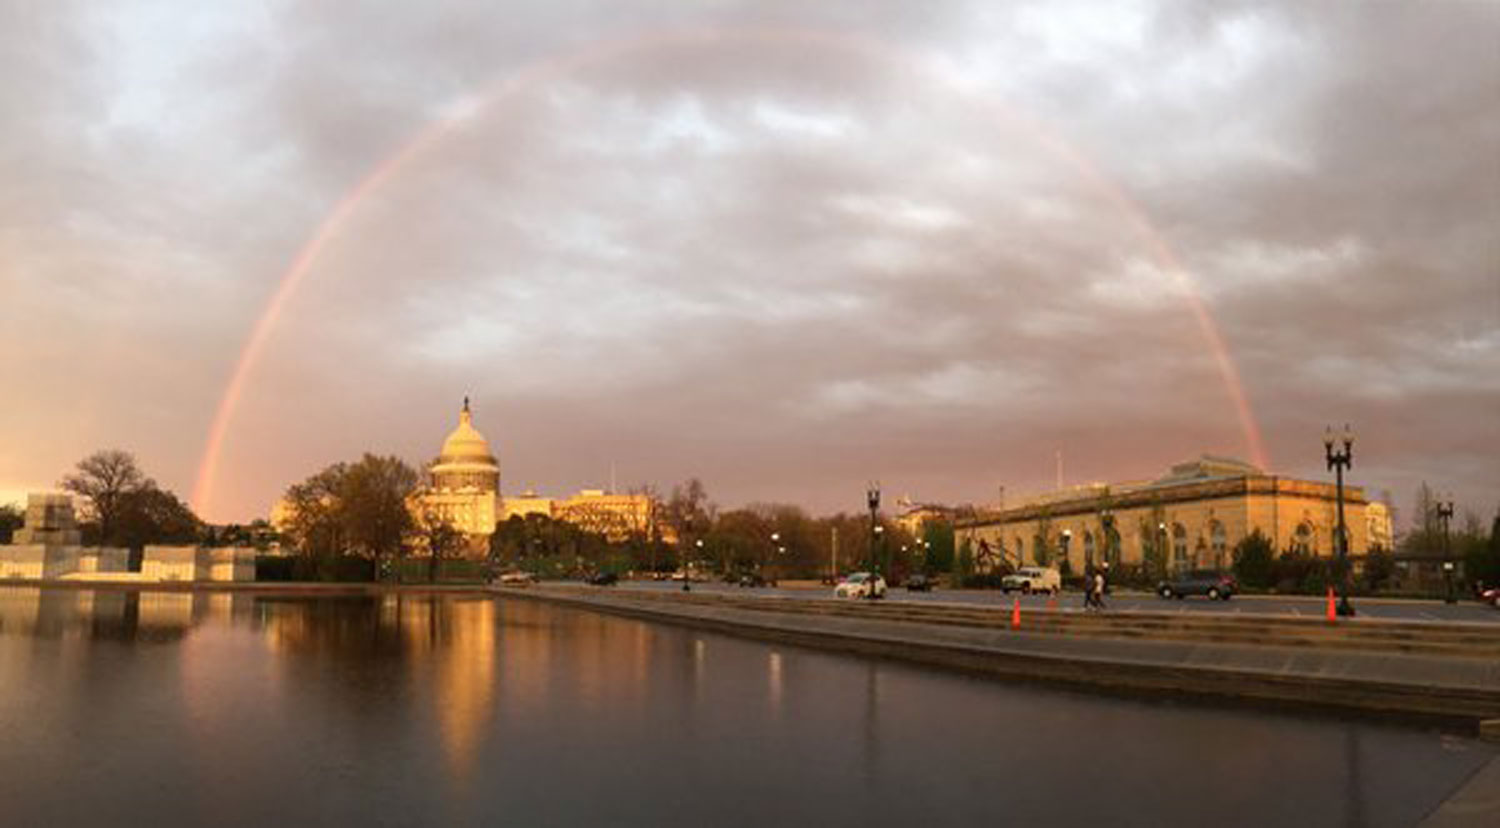 A rainbow is spotted over the U.S. Capitol. (Courtesy @SeanTHenderson)